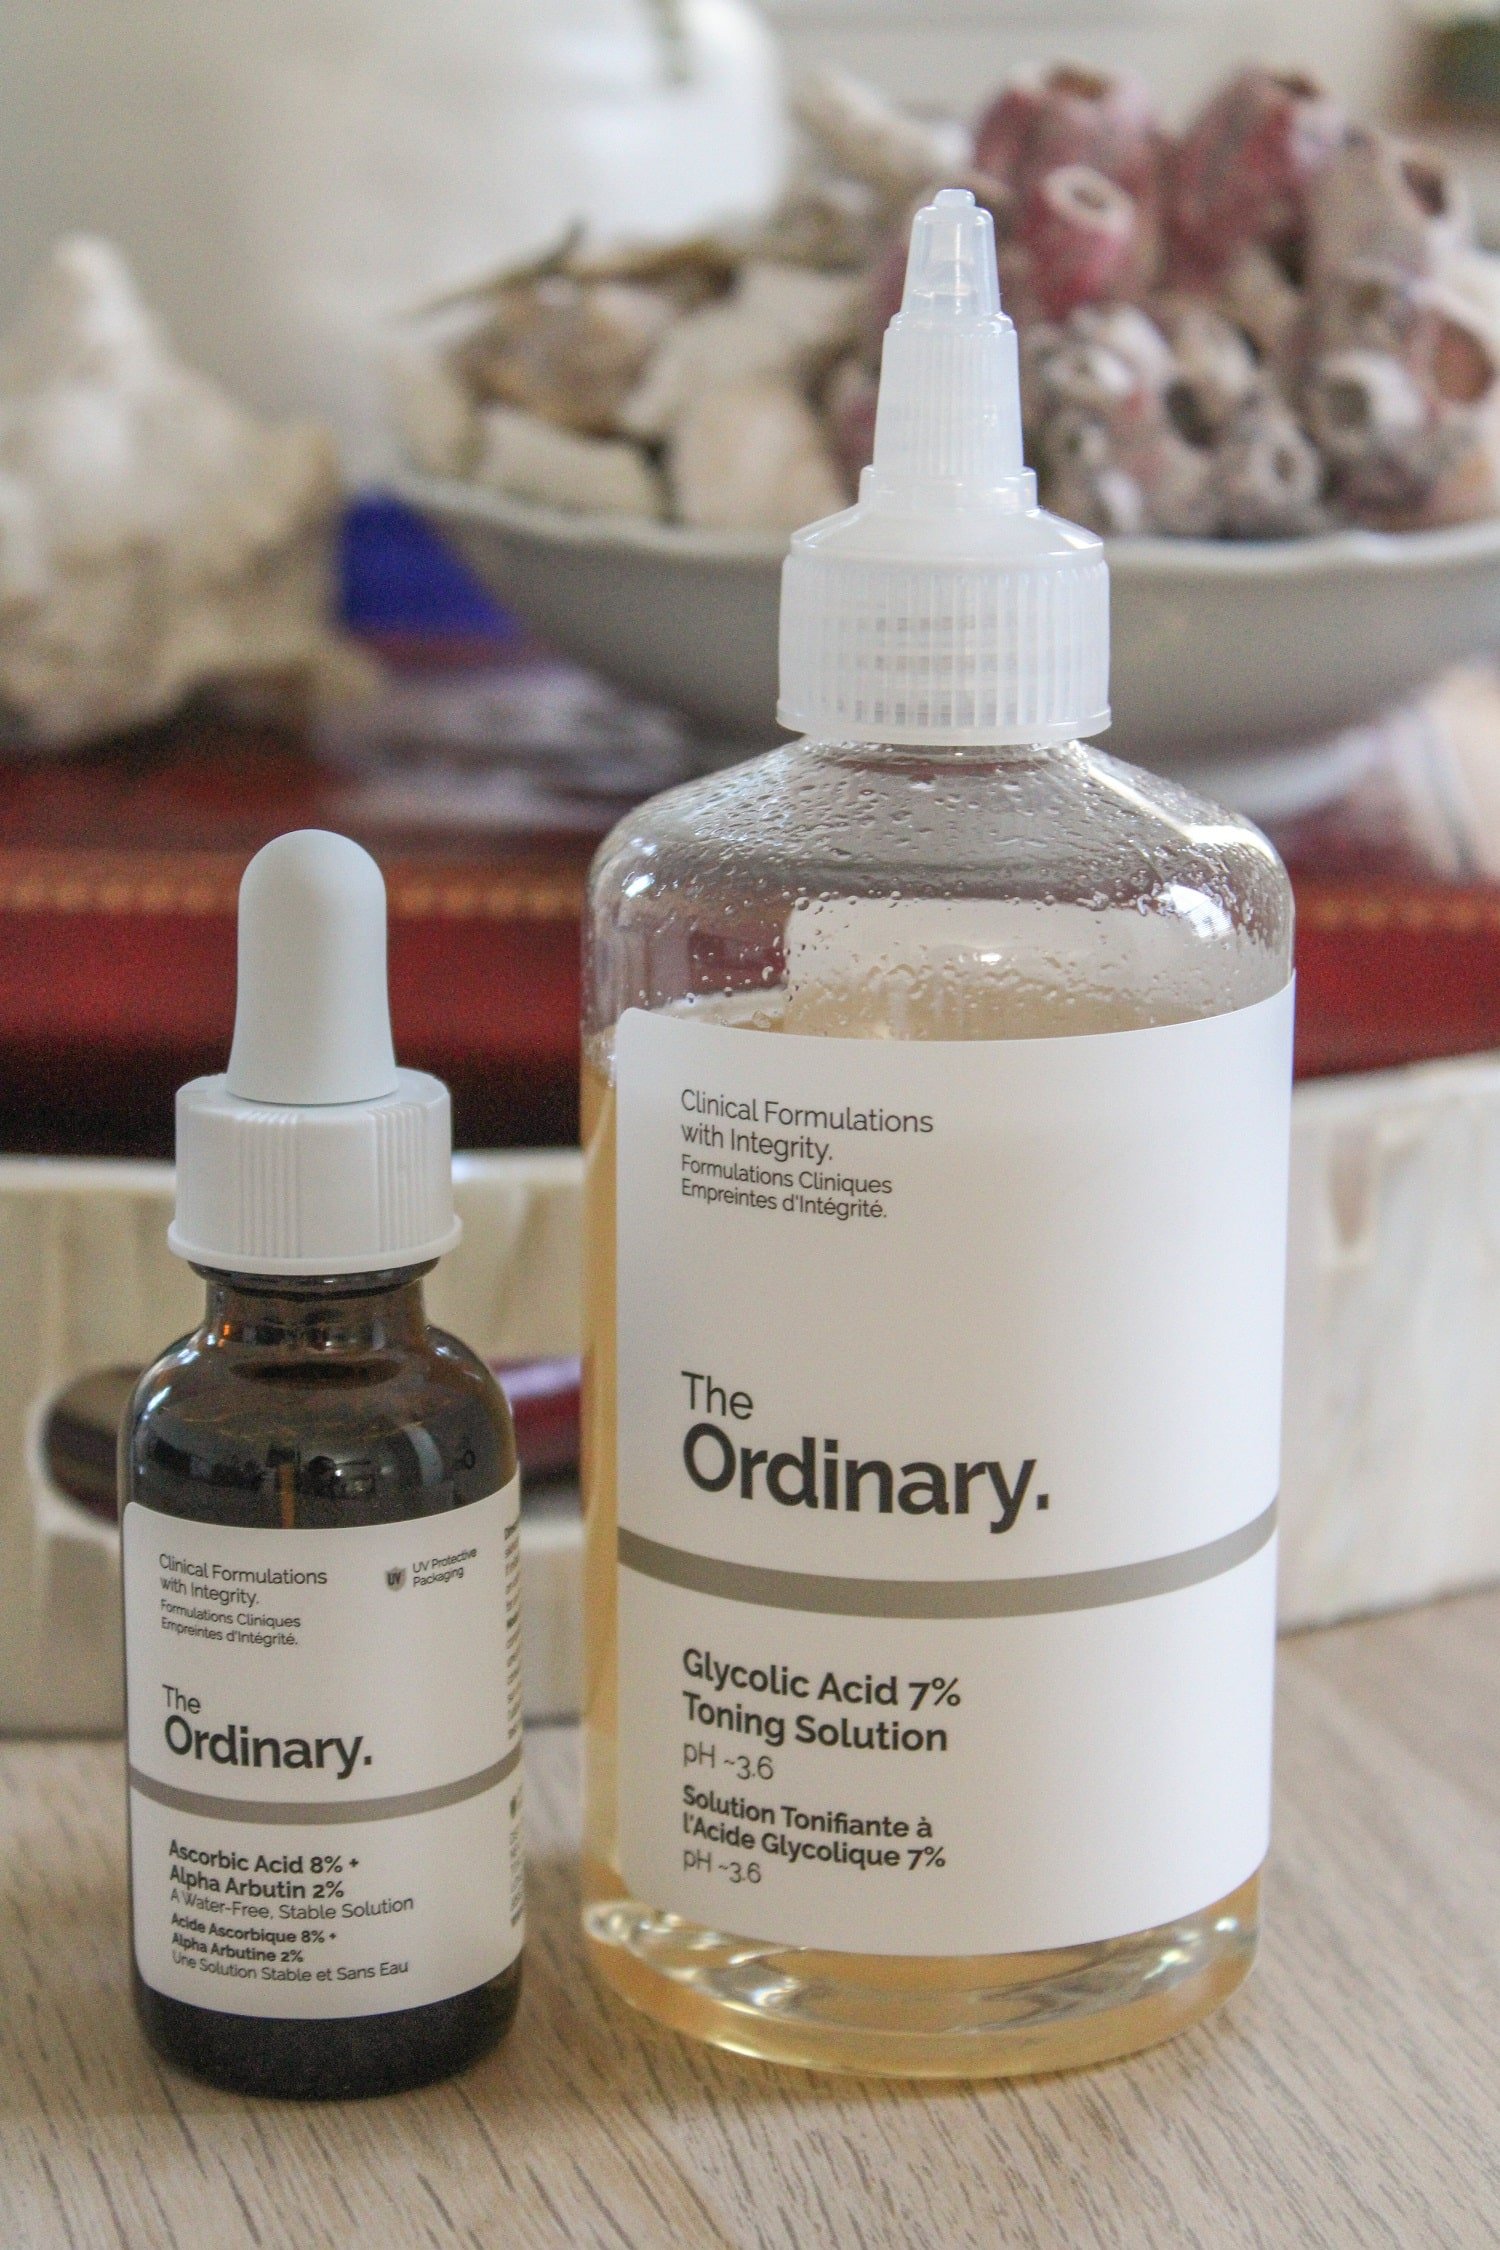 My favorite things right now | Blooming Magnolias Blog | Beauty, The Ordinary, Glycolic Acid 7% Toning Solution, Ascorbic Acid 8% + Alpha Arbutin 2%